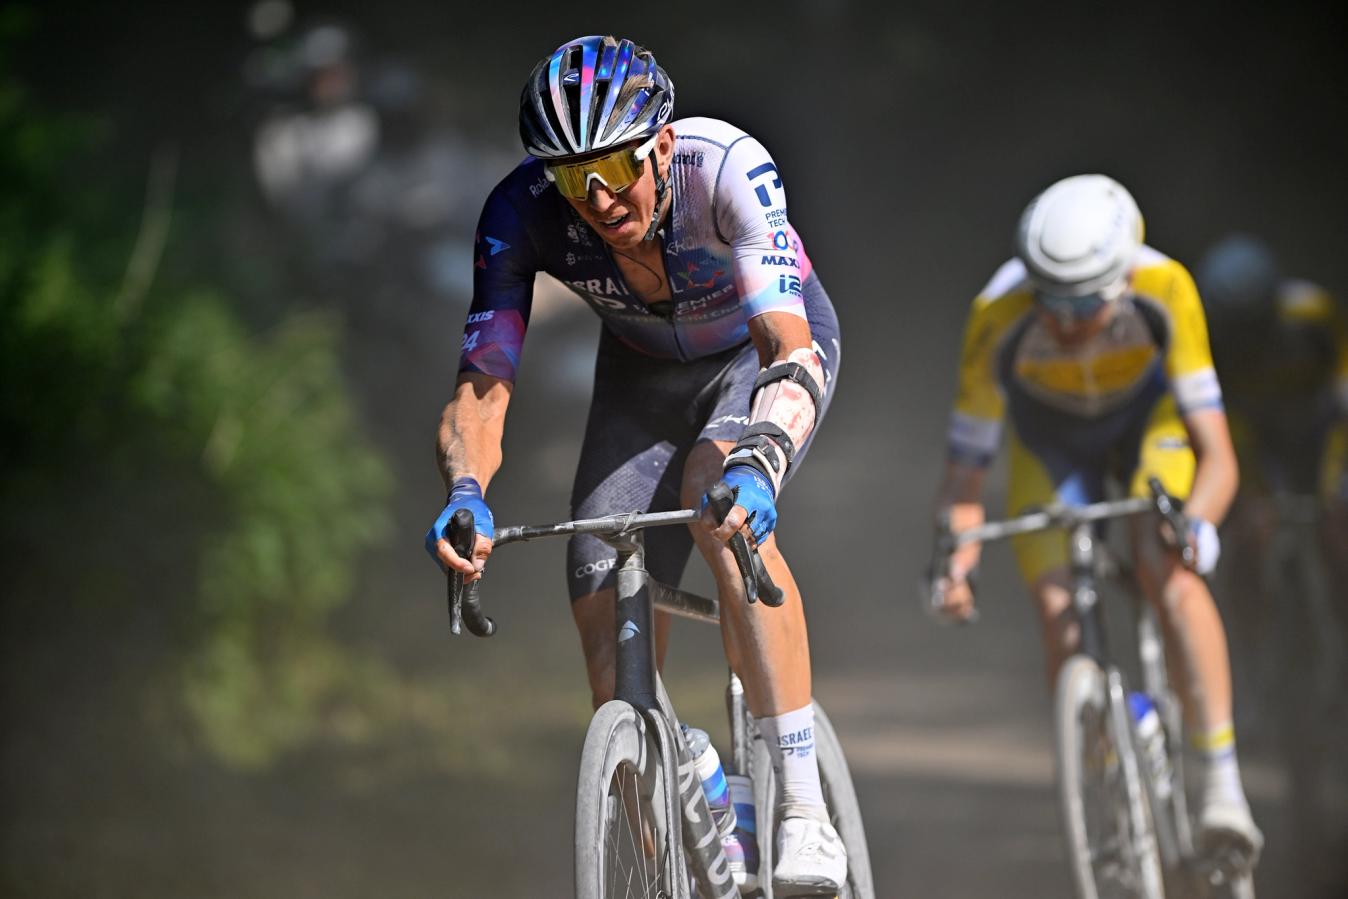 Vanmarcke’s final race came last month at the Belgian Nationals road race